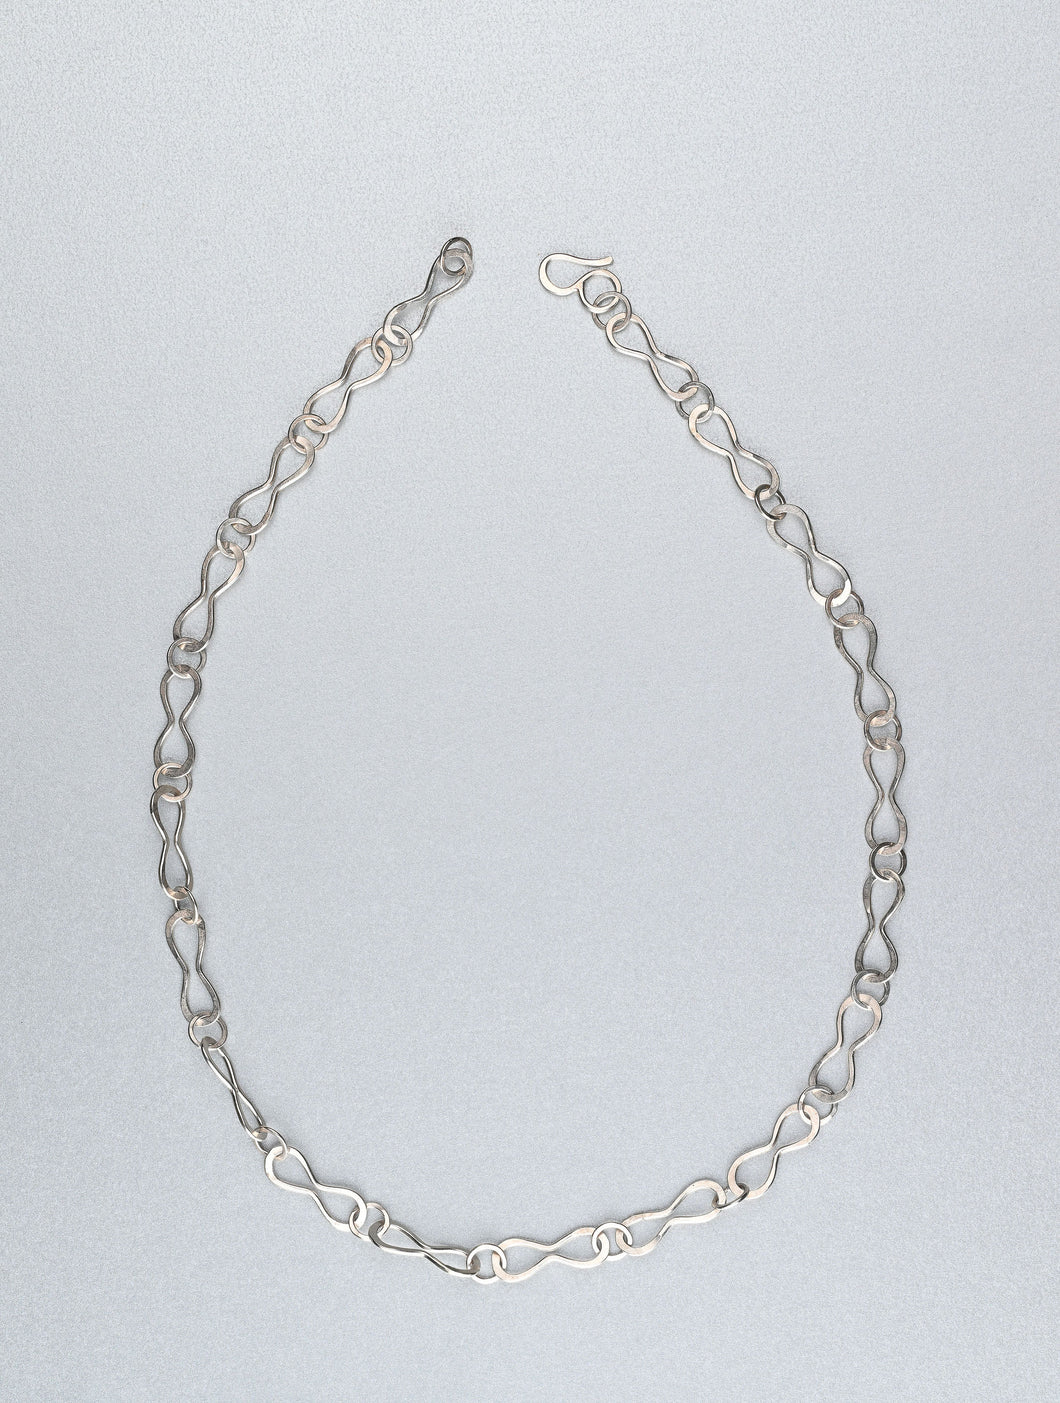 Hand beaten silver chain with figure of eight links